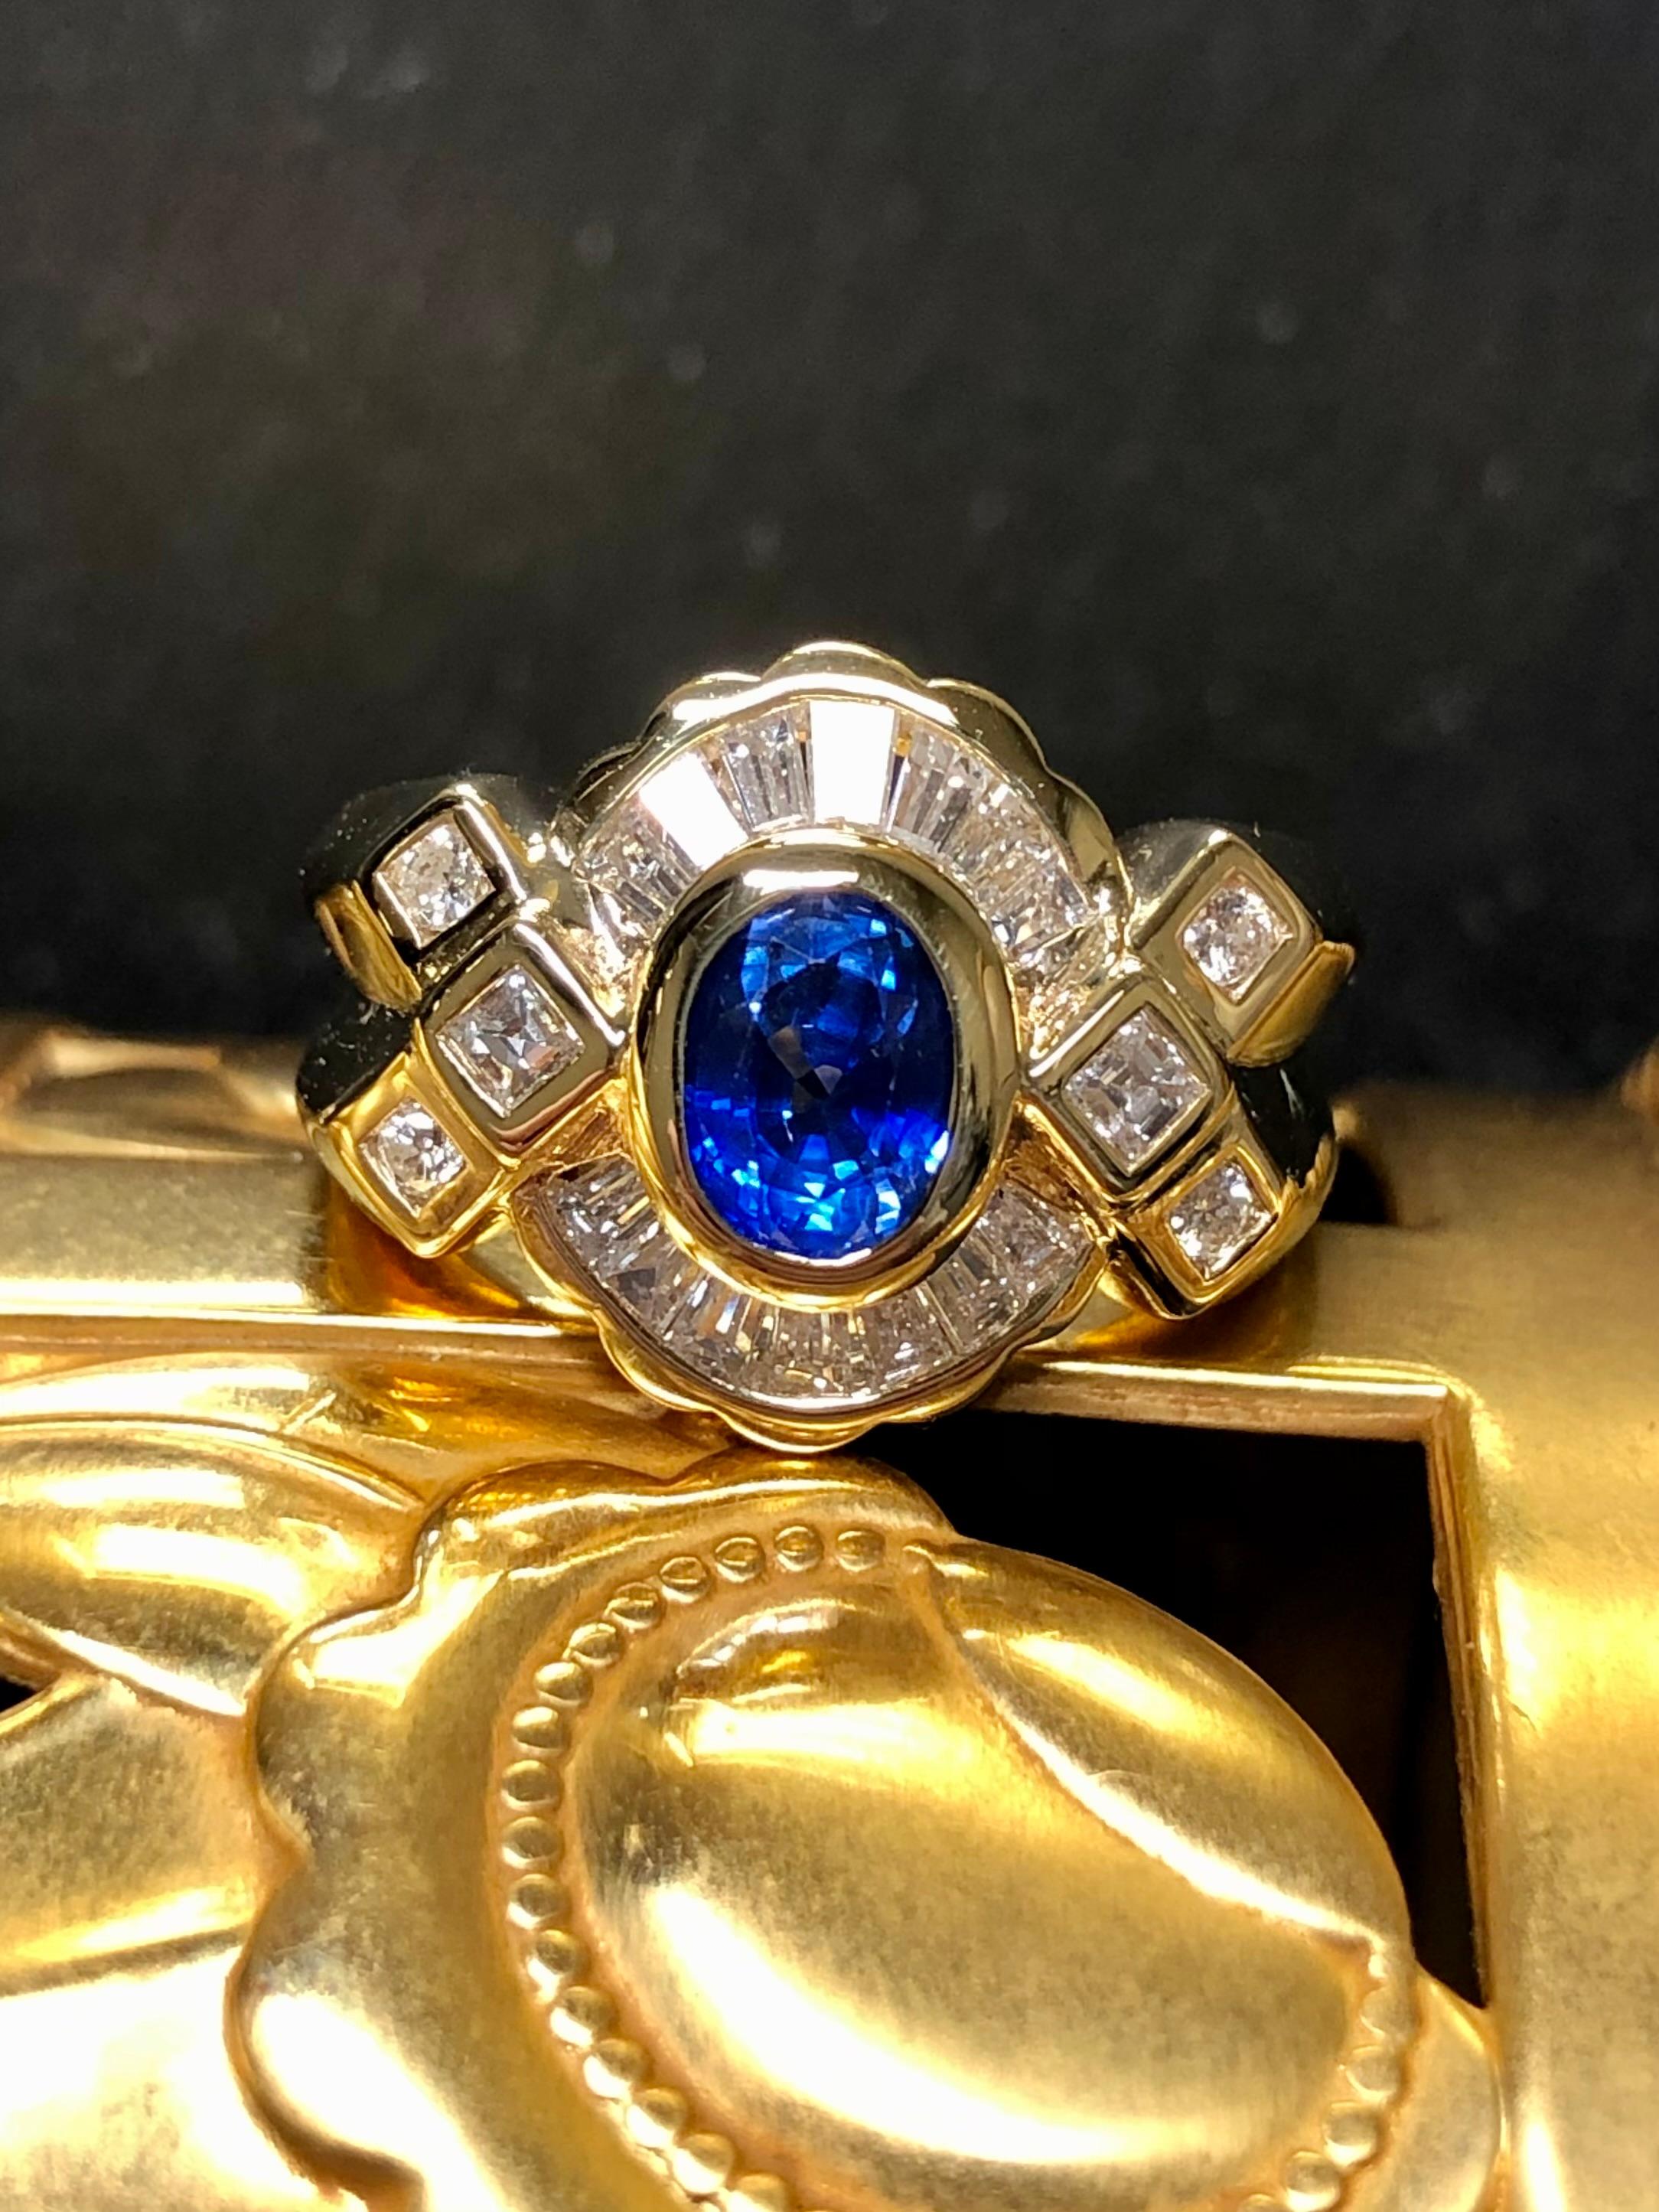 
A gorgeous ring done in supple 18K yellow gold and centered with a gorgeous royal blue natural bezel set sapphire weighing approximately .80ct surrounded by approximately 1.60cttw in tapered and square baguette as well as round